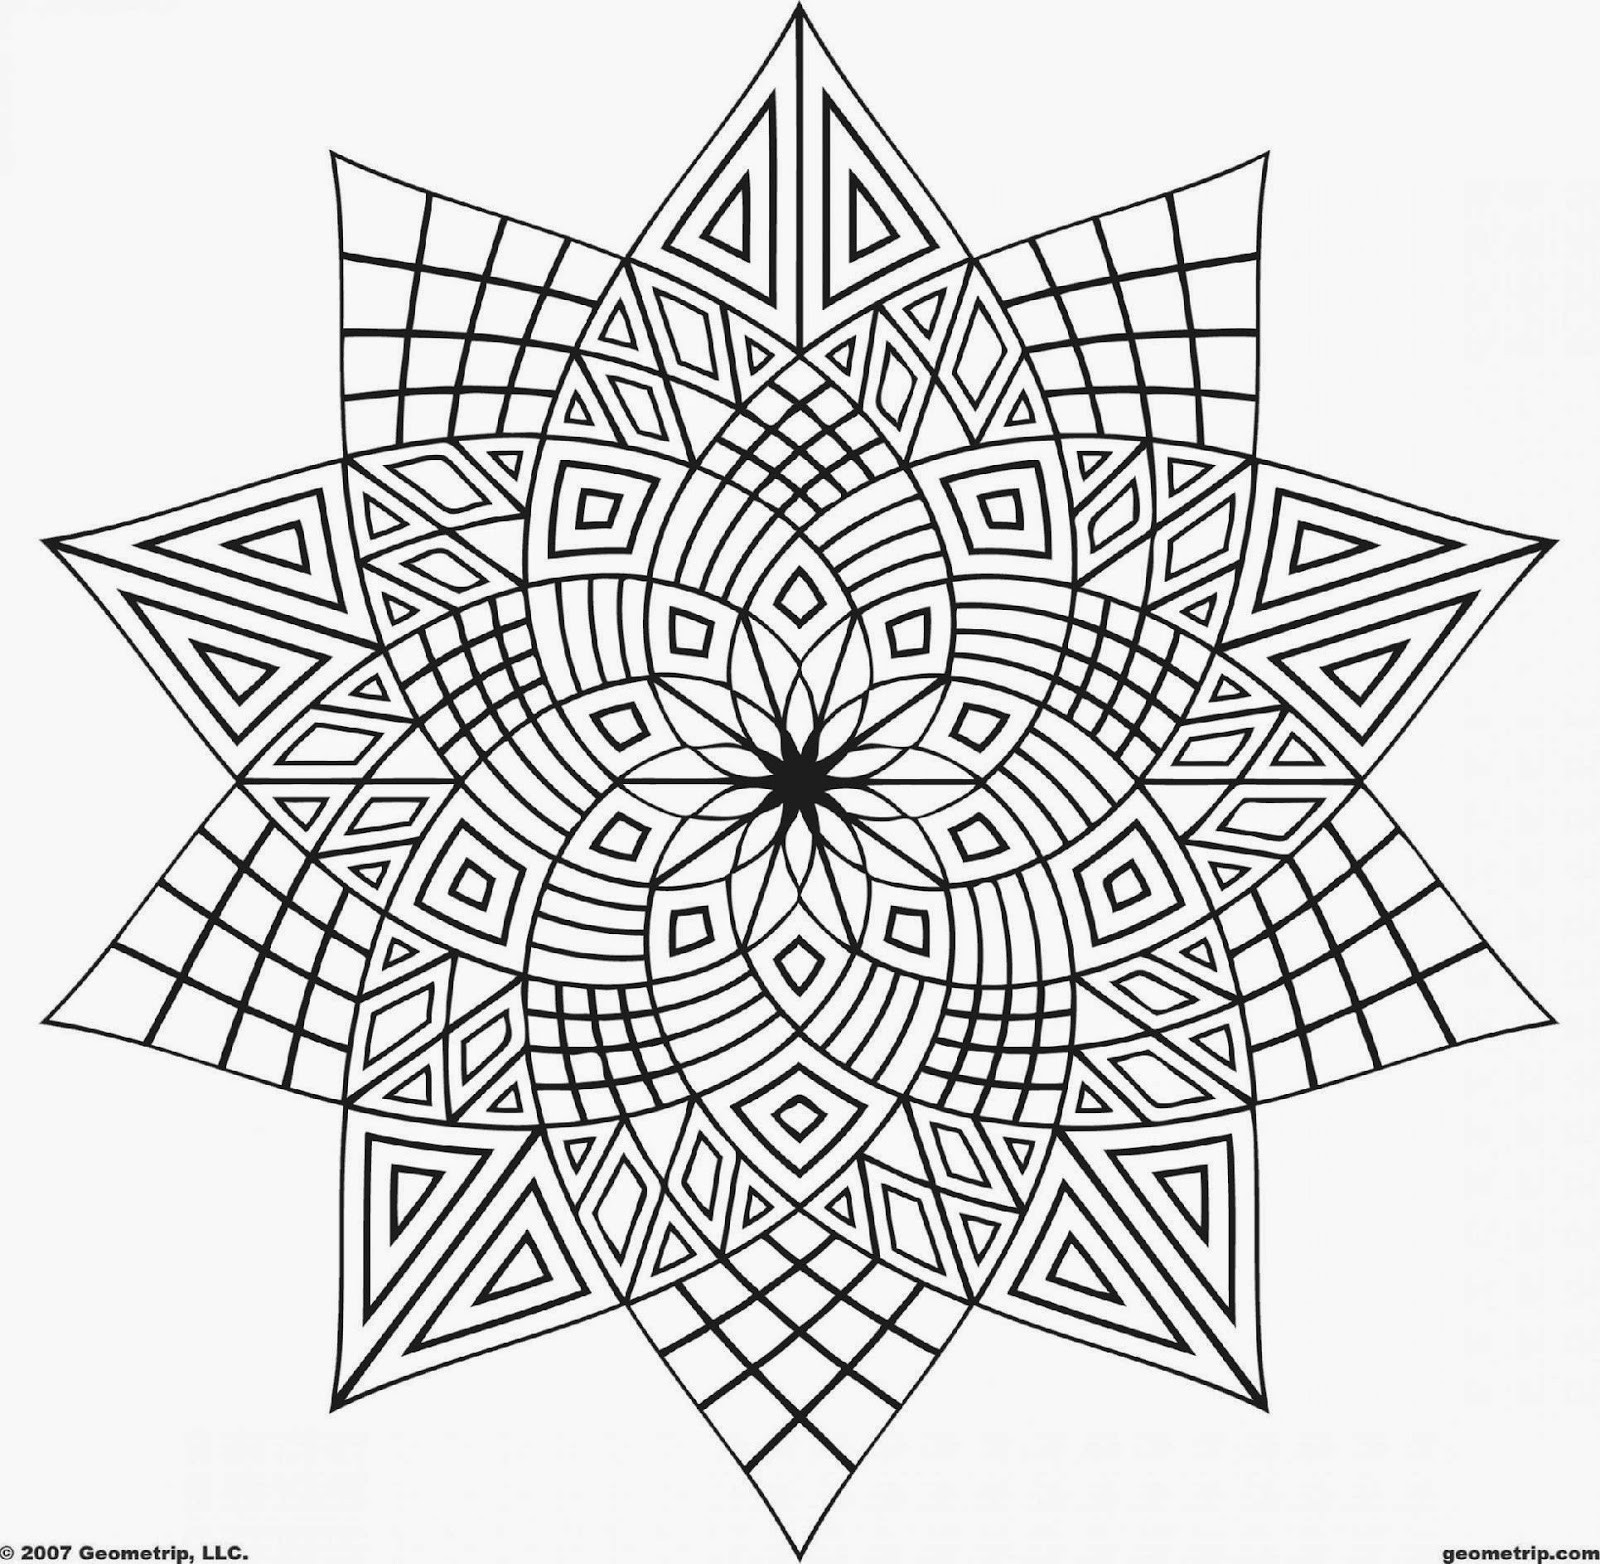 Coloring Pages For Adults Printable
 Awesome Coloring Pages